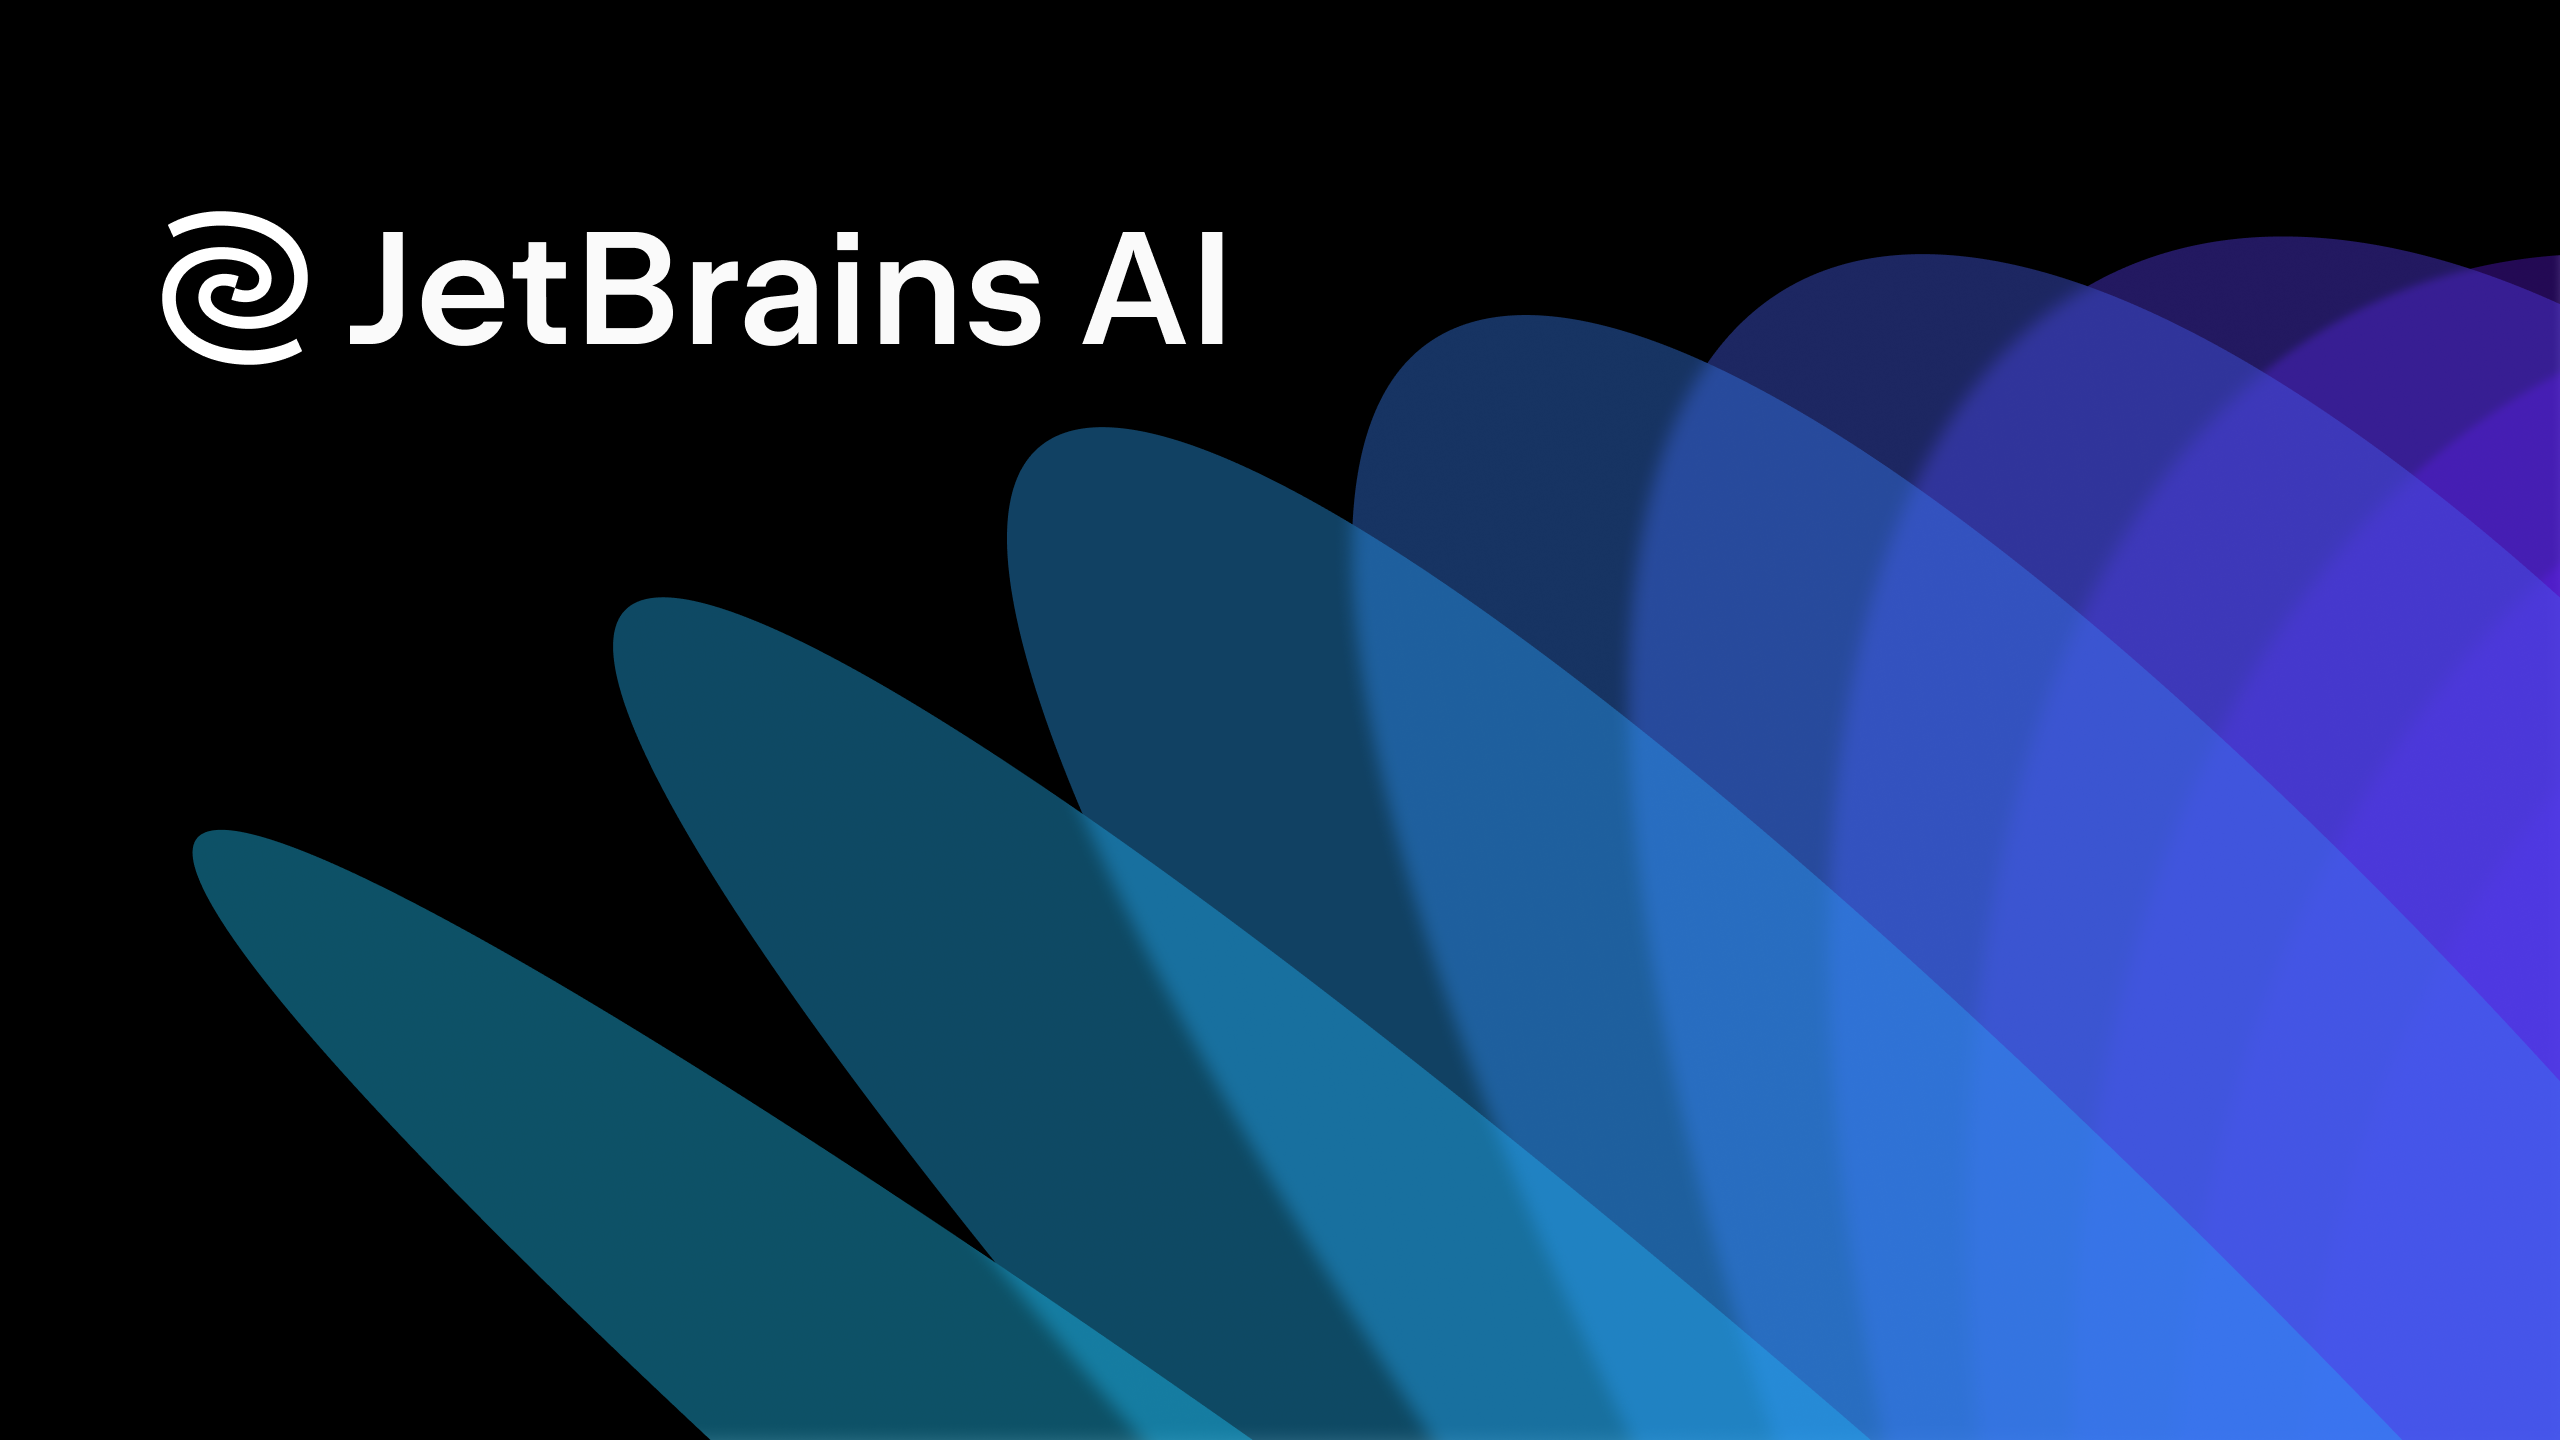 Introducing JetBrains AI and the In-IDE AI Assistant